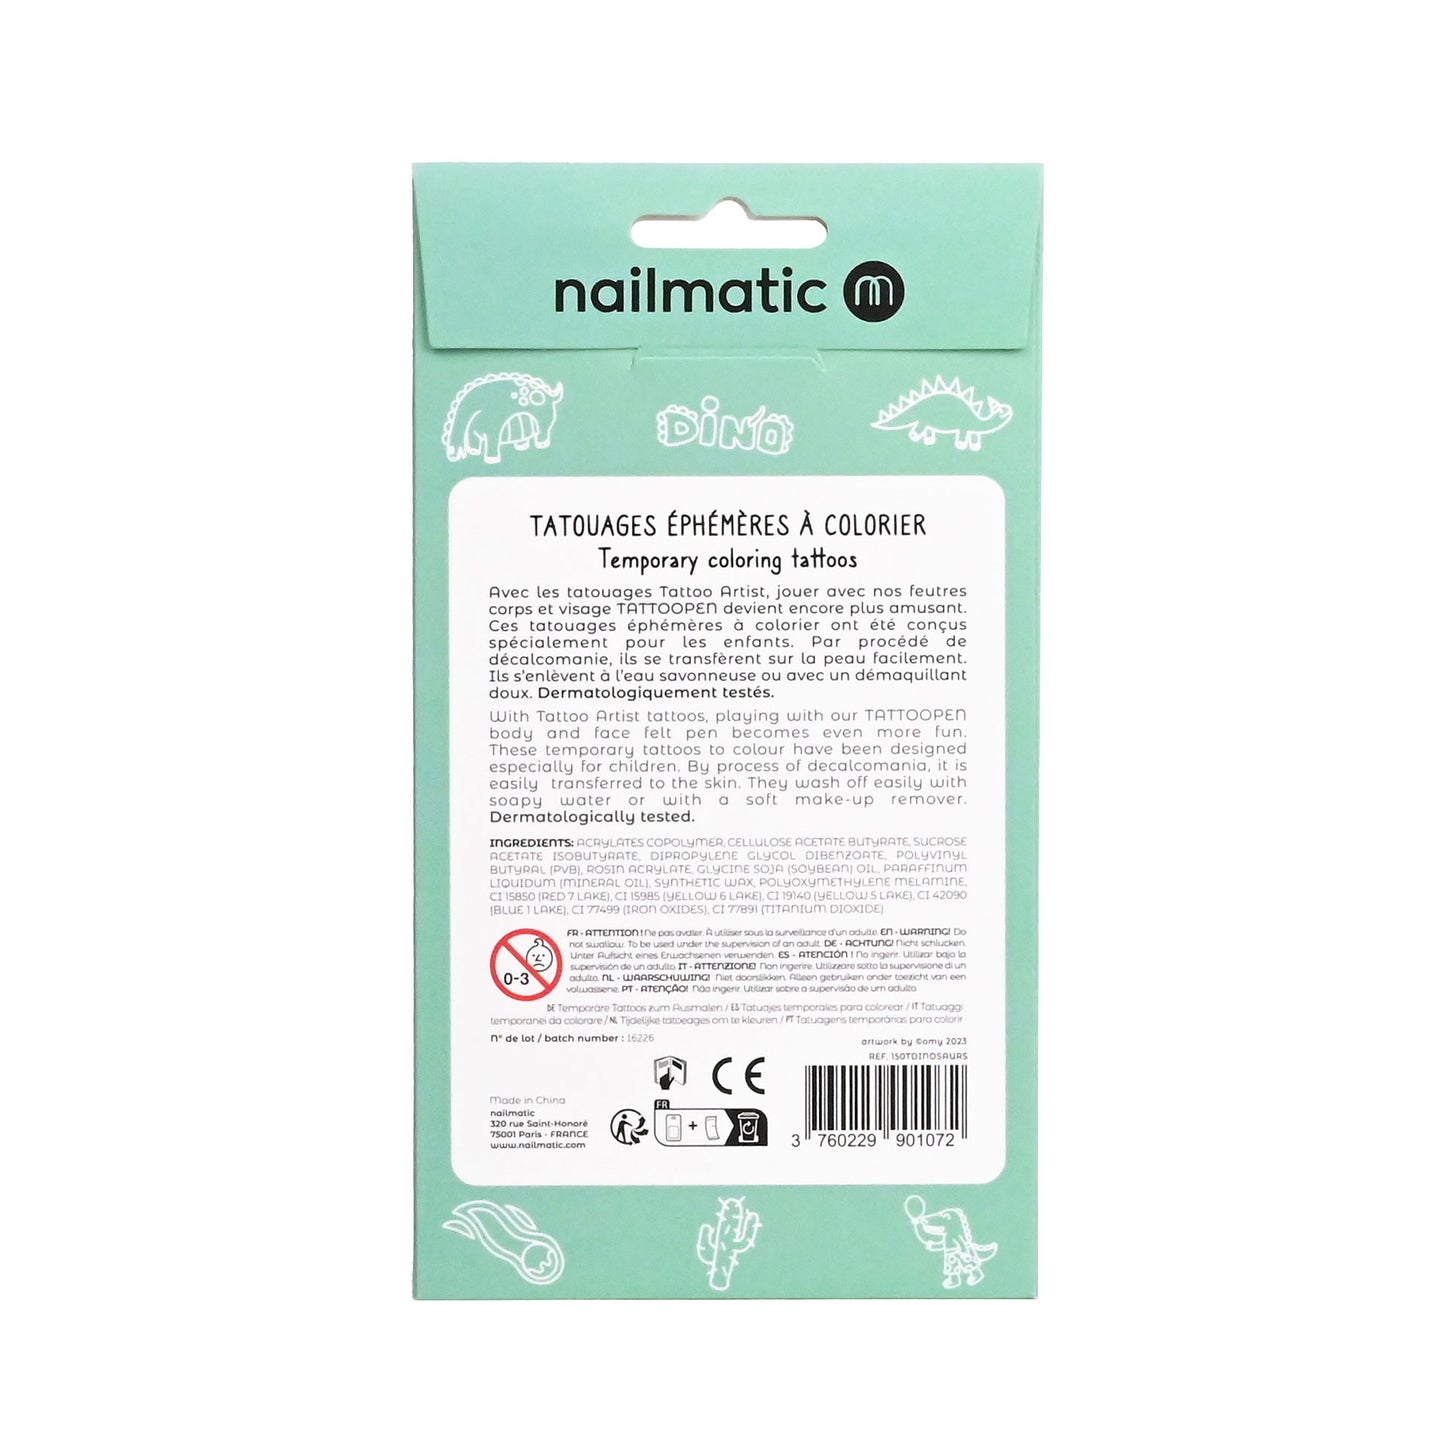 Temporary Coloring Tattoos - Dinosaurs packaging back